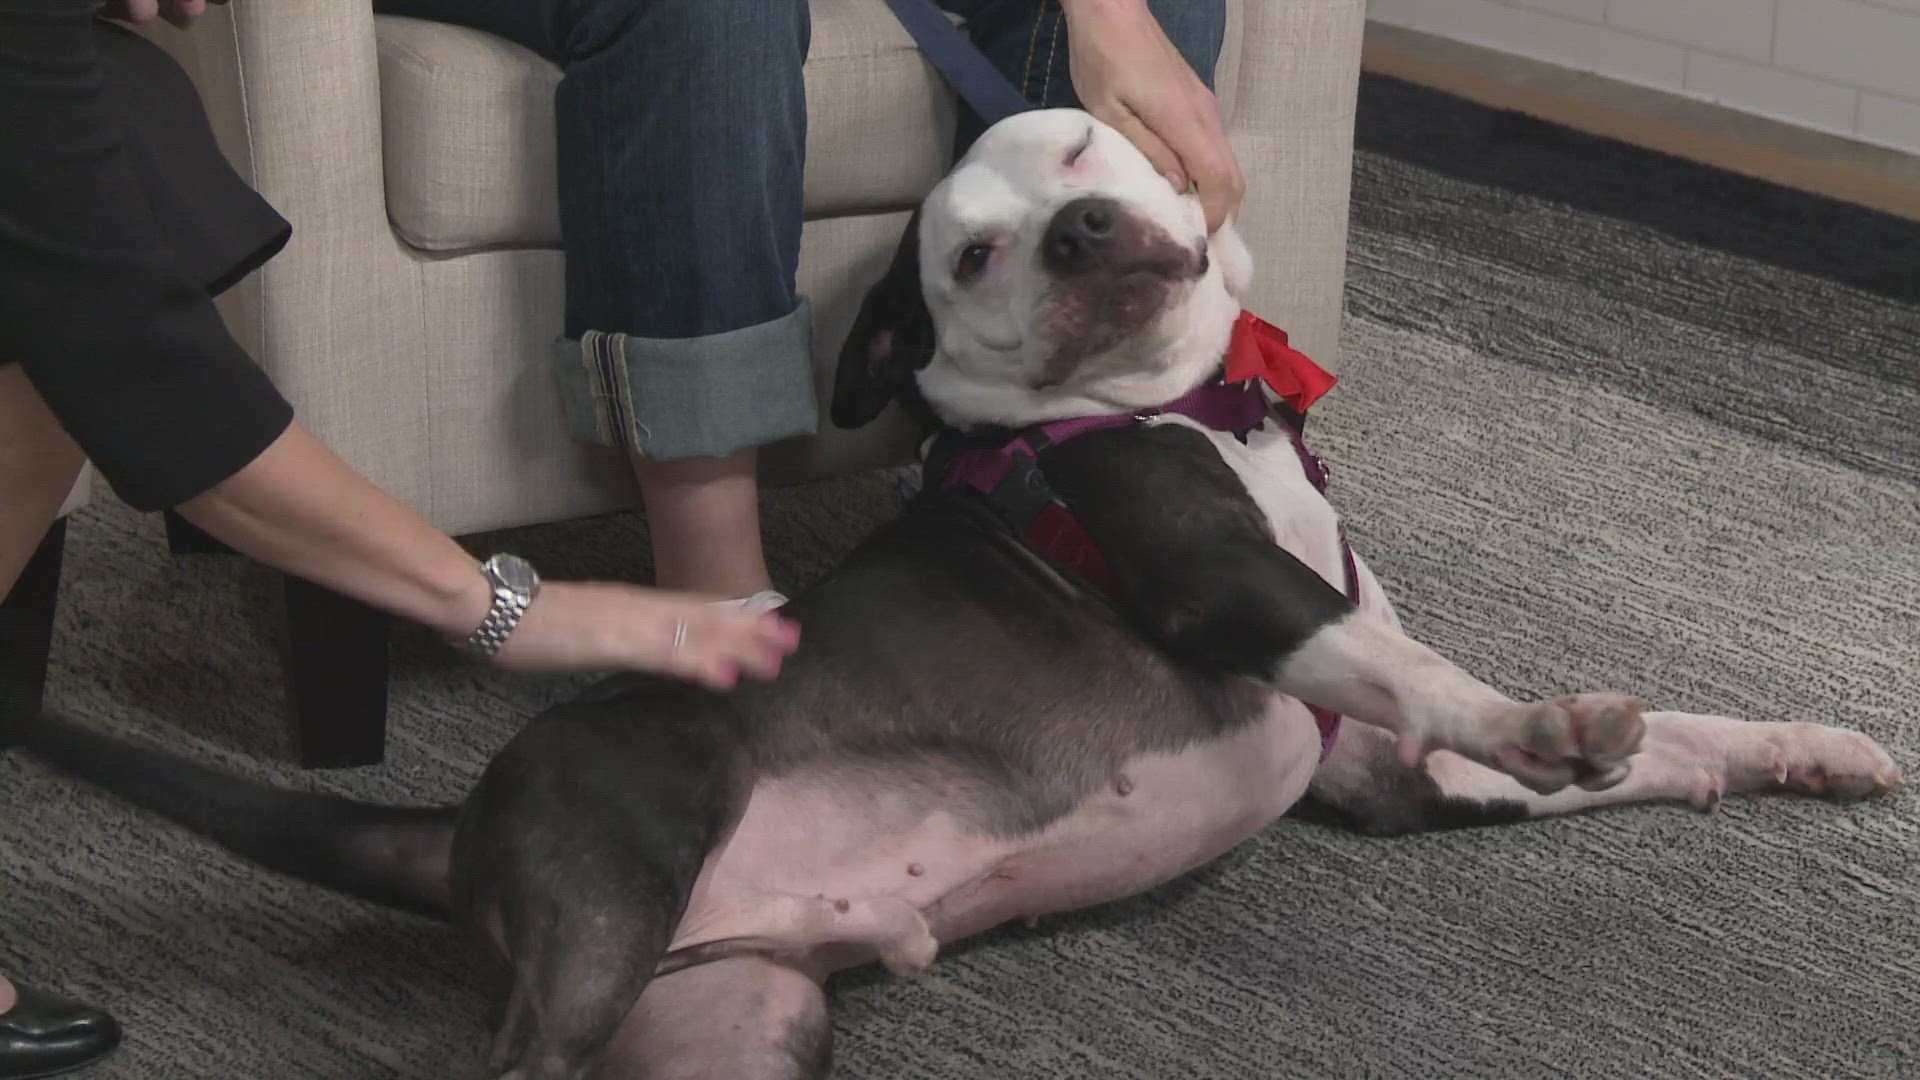 Every Friday on KVUE Midday, we introduce you to a new furry friend in need of a forever home.